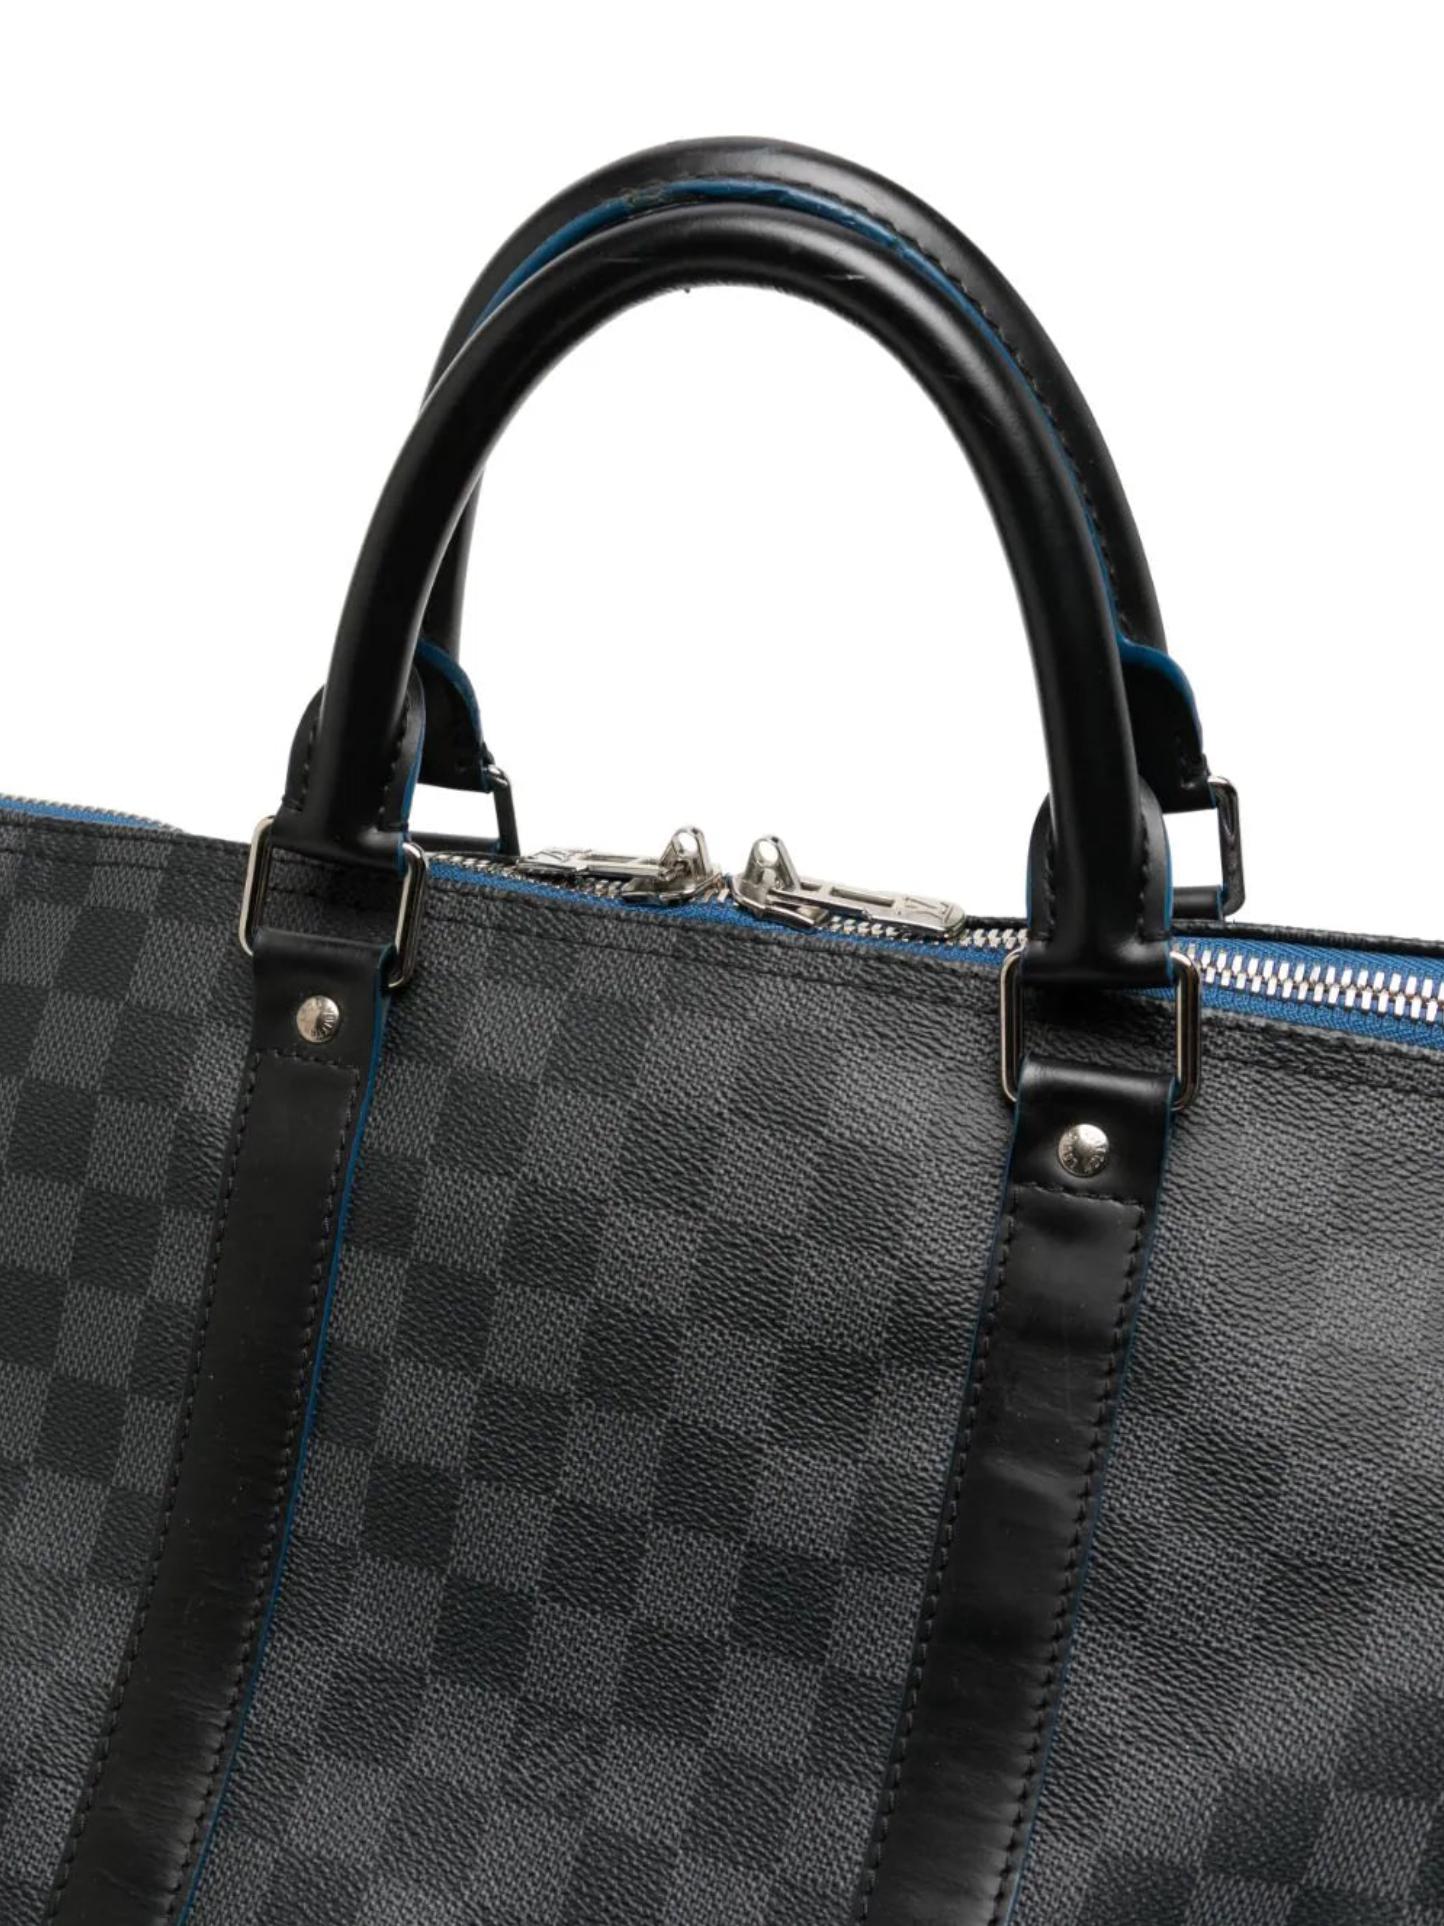 Louis Vuitton Damier Graphite Keepall Bandouliere 55 In Excellent Condition In London, GB